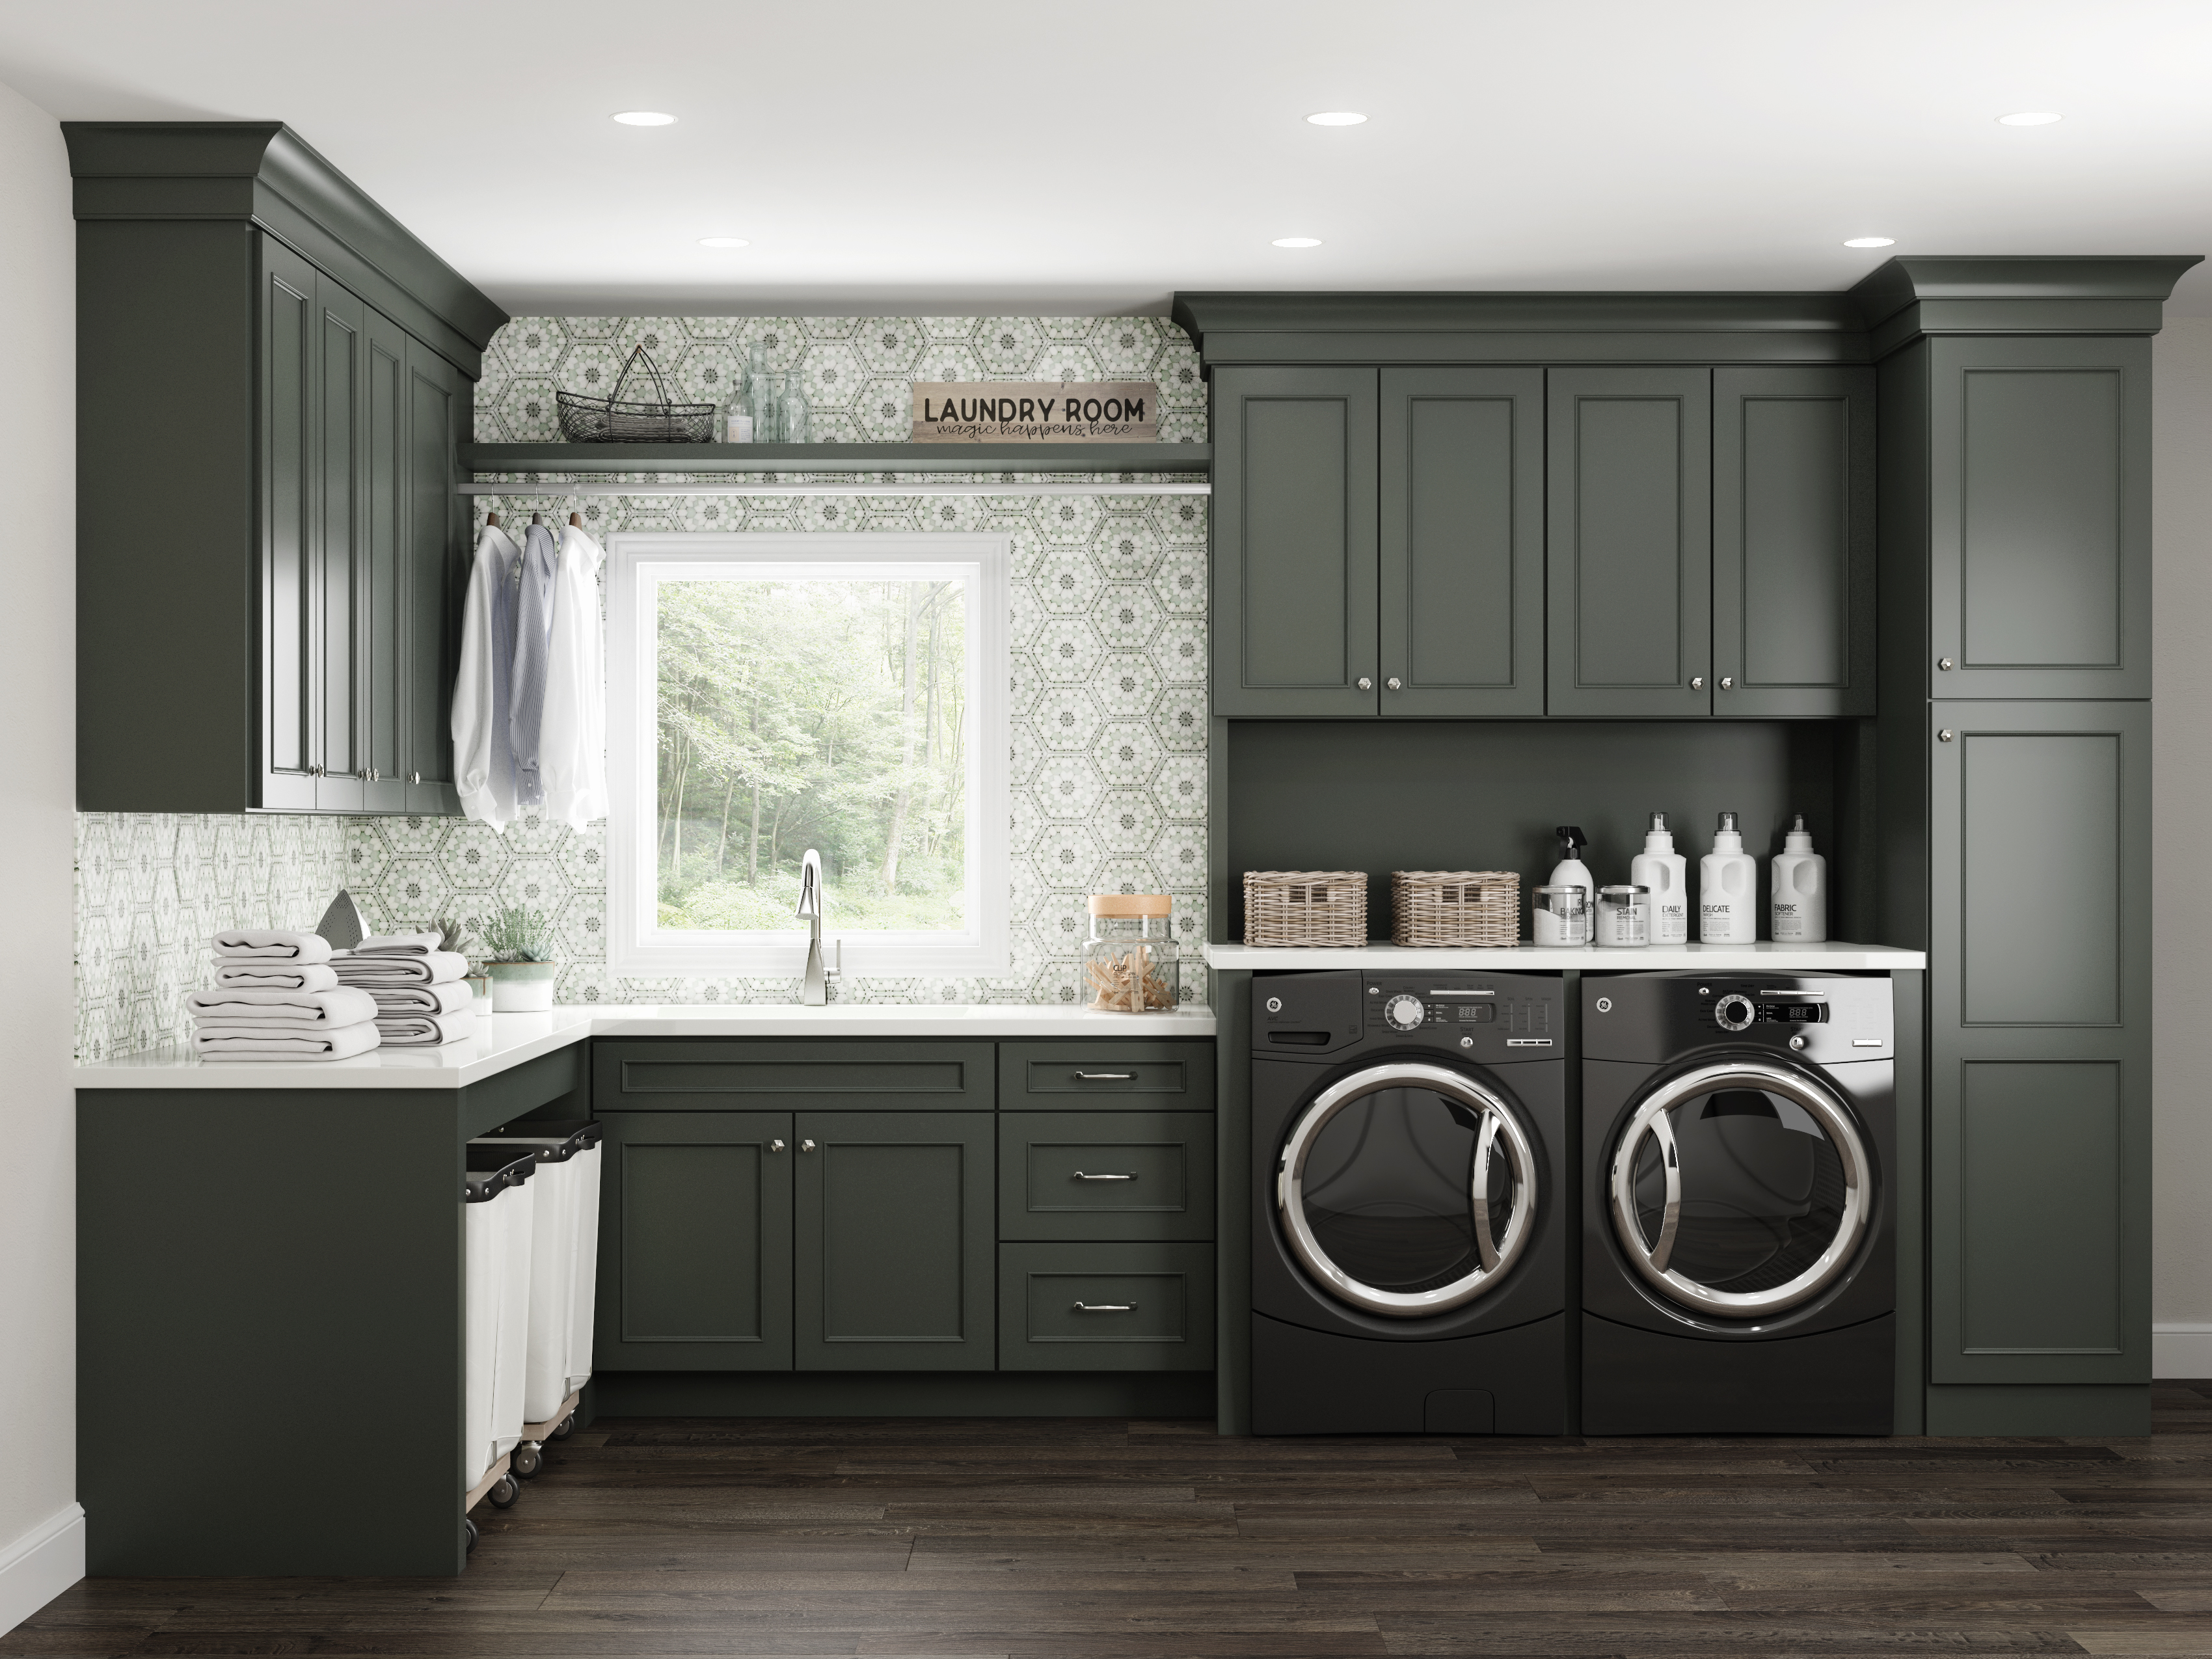 Laundry Room Sink Ideas (Utility Sink And Cabinet Design